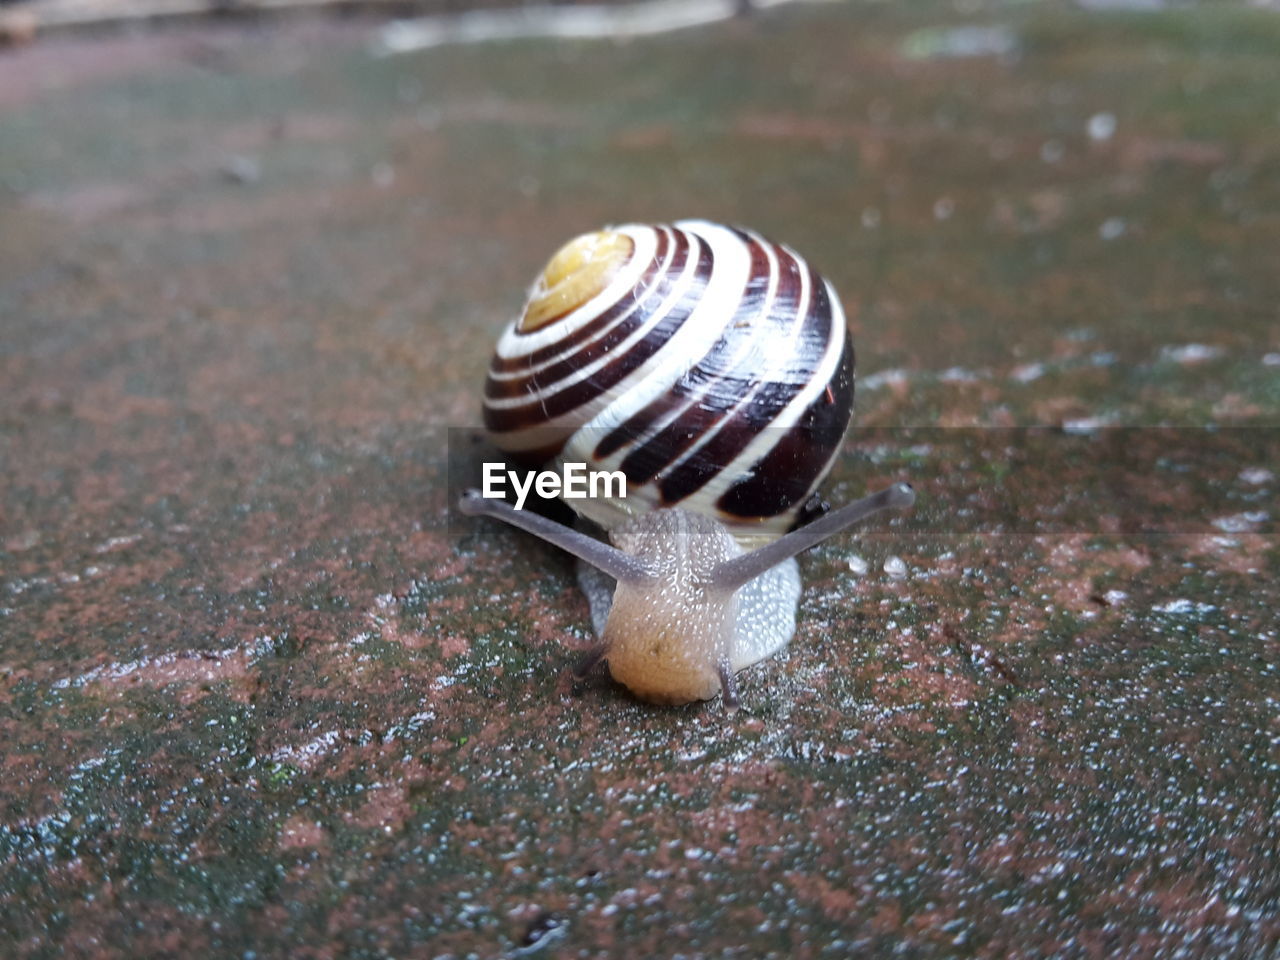 Close-up of snail on wet footpath